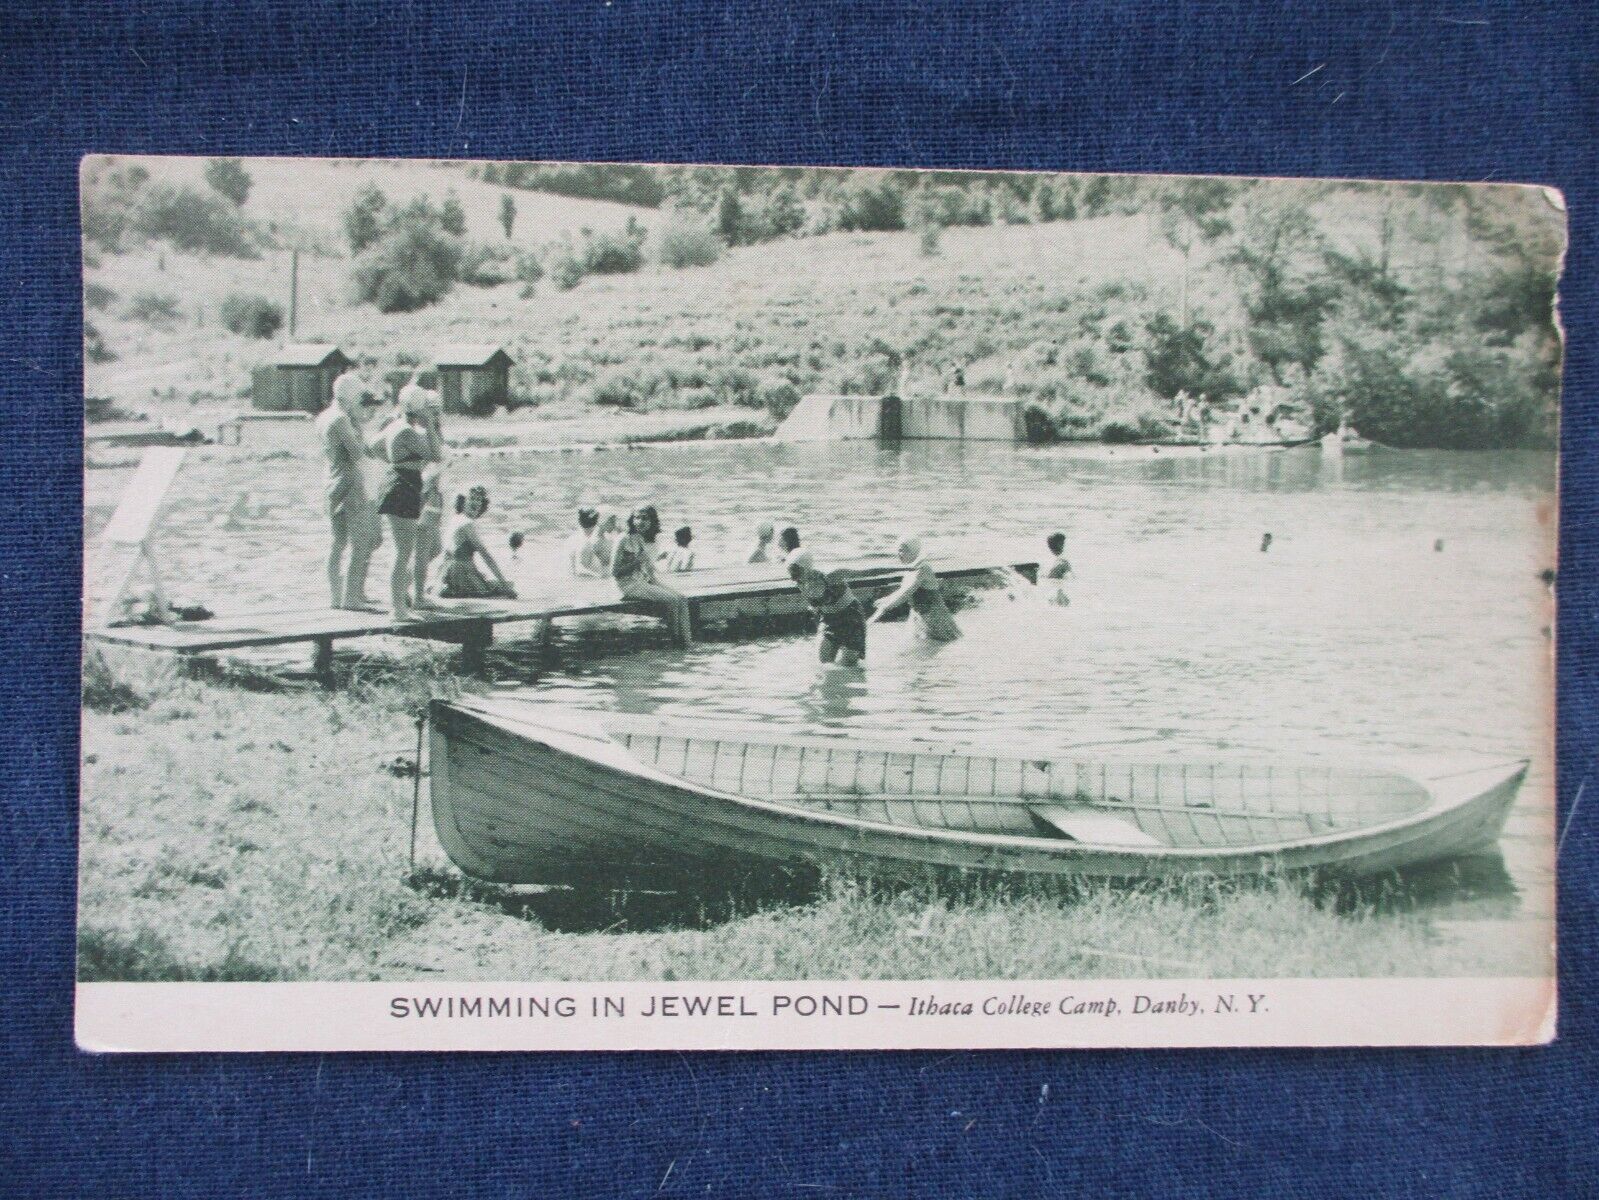 1930s Danby New York Ithaca College Camp Swimmers at Jewel Pond Postcard